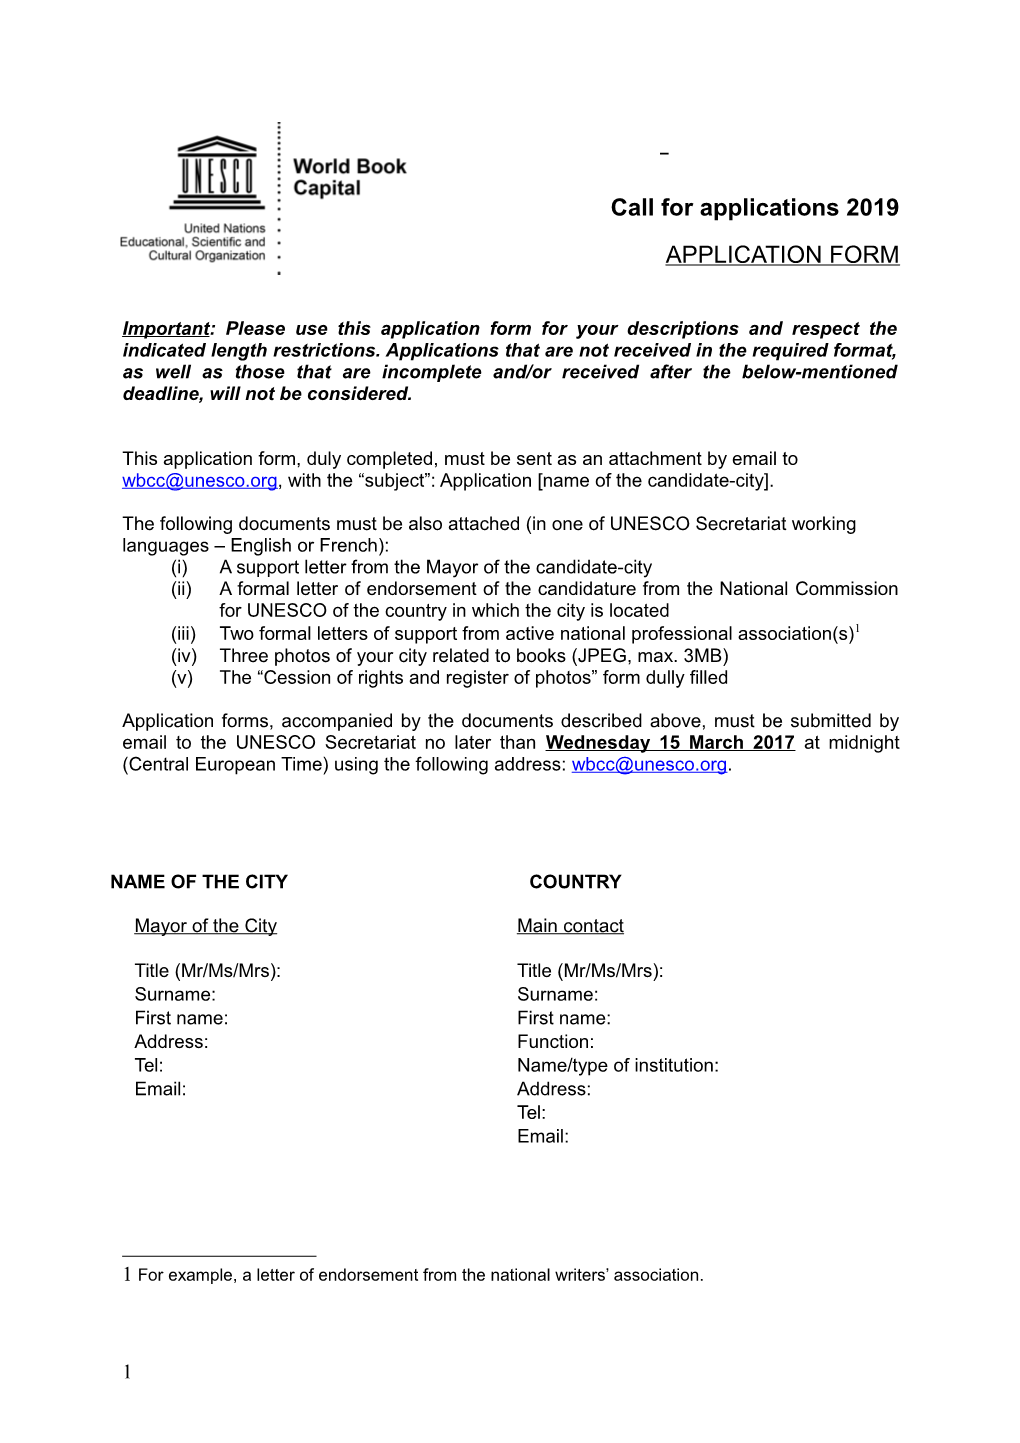 Call for Applications 2019